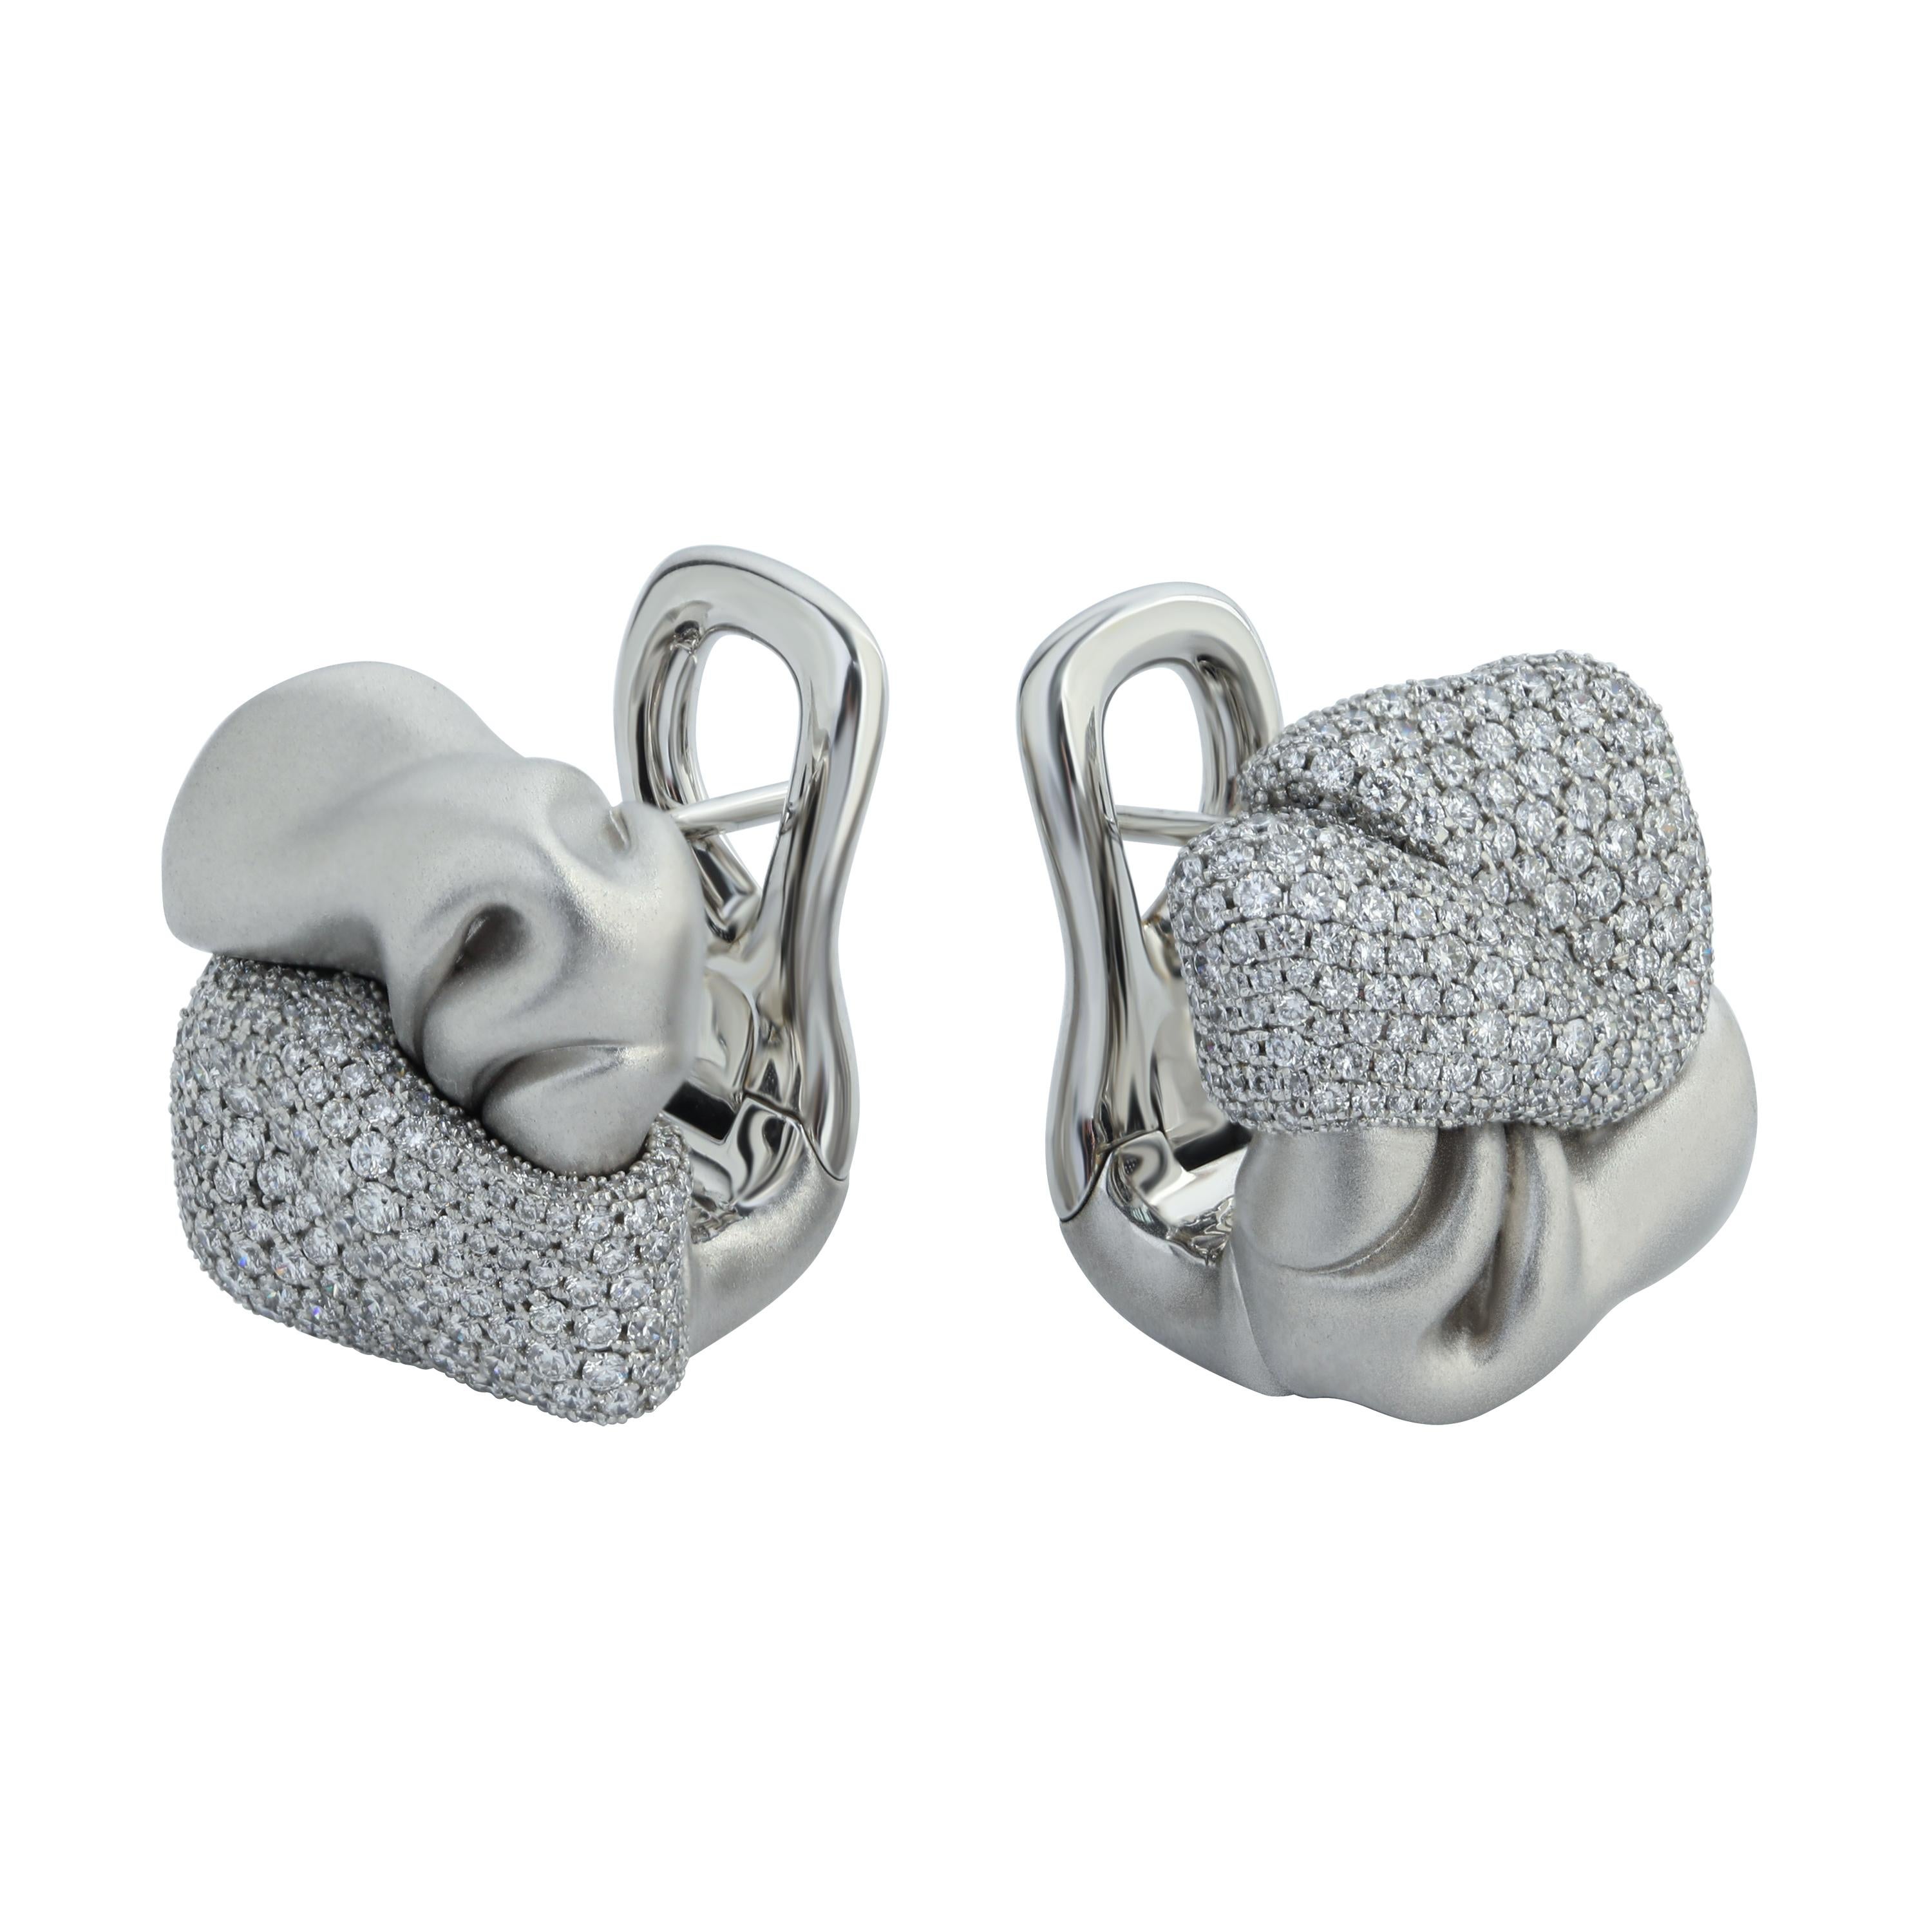 Diamonds 18 Karat White Gold Earrings
OurPret-a-Porter collection is full of different textures and patterns. This time we decided to depict just a piece of crumpled fabric in the Earrings. Half of the Earring is made of 18 Karat Matte White Gold,